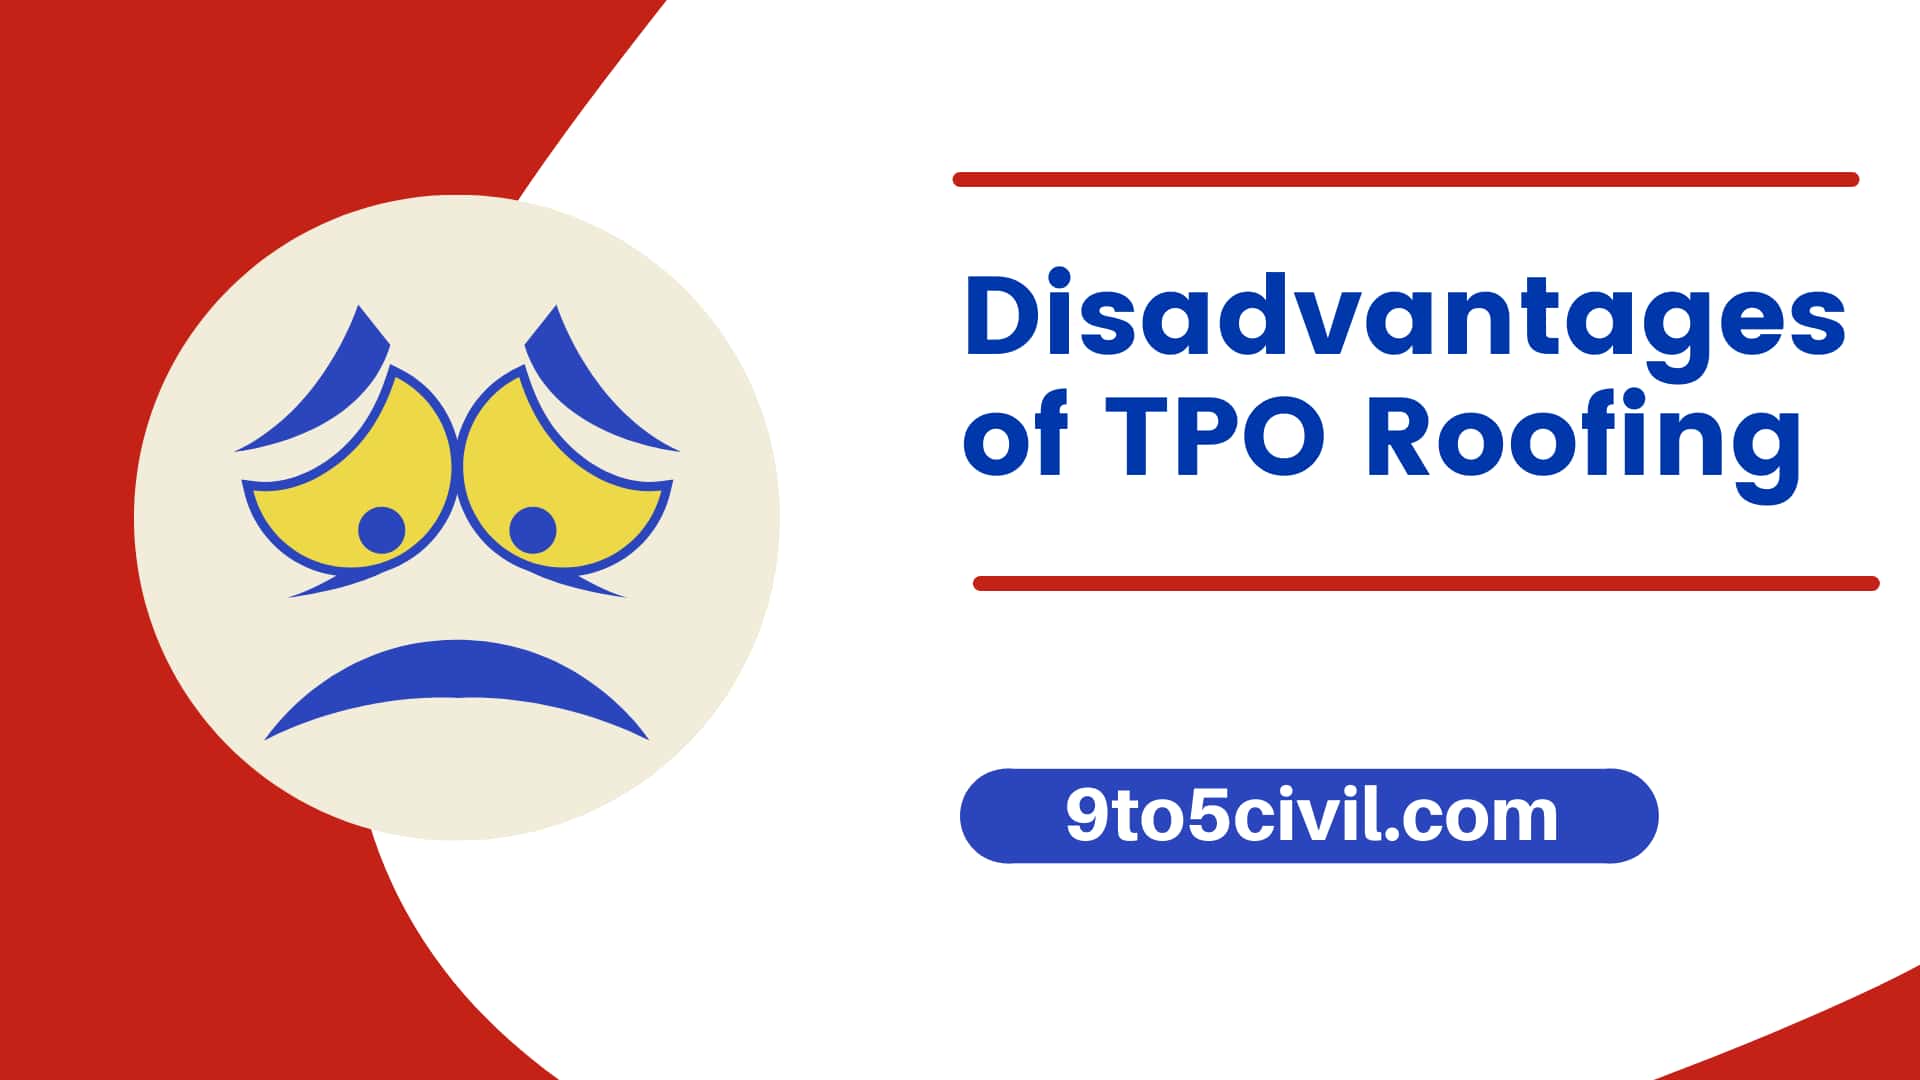 Disadvantages of TPO Roofing